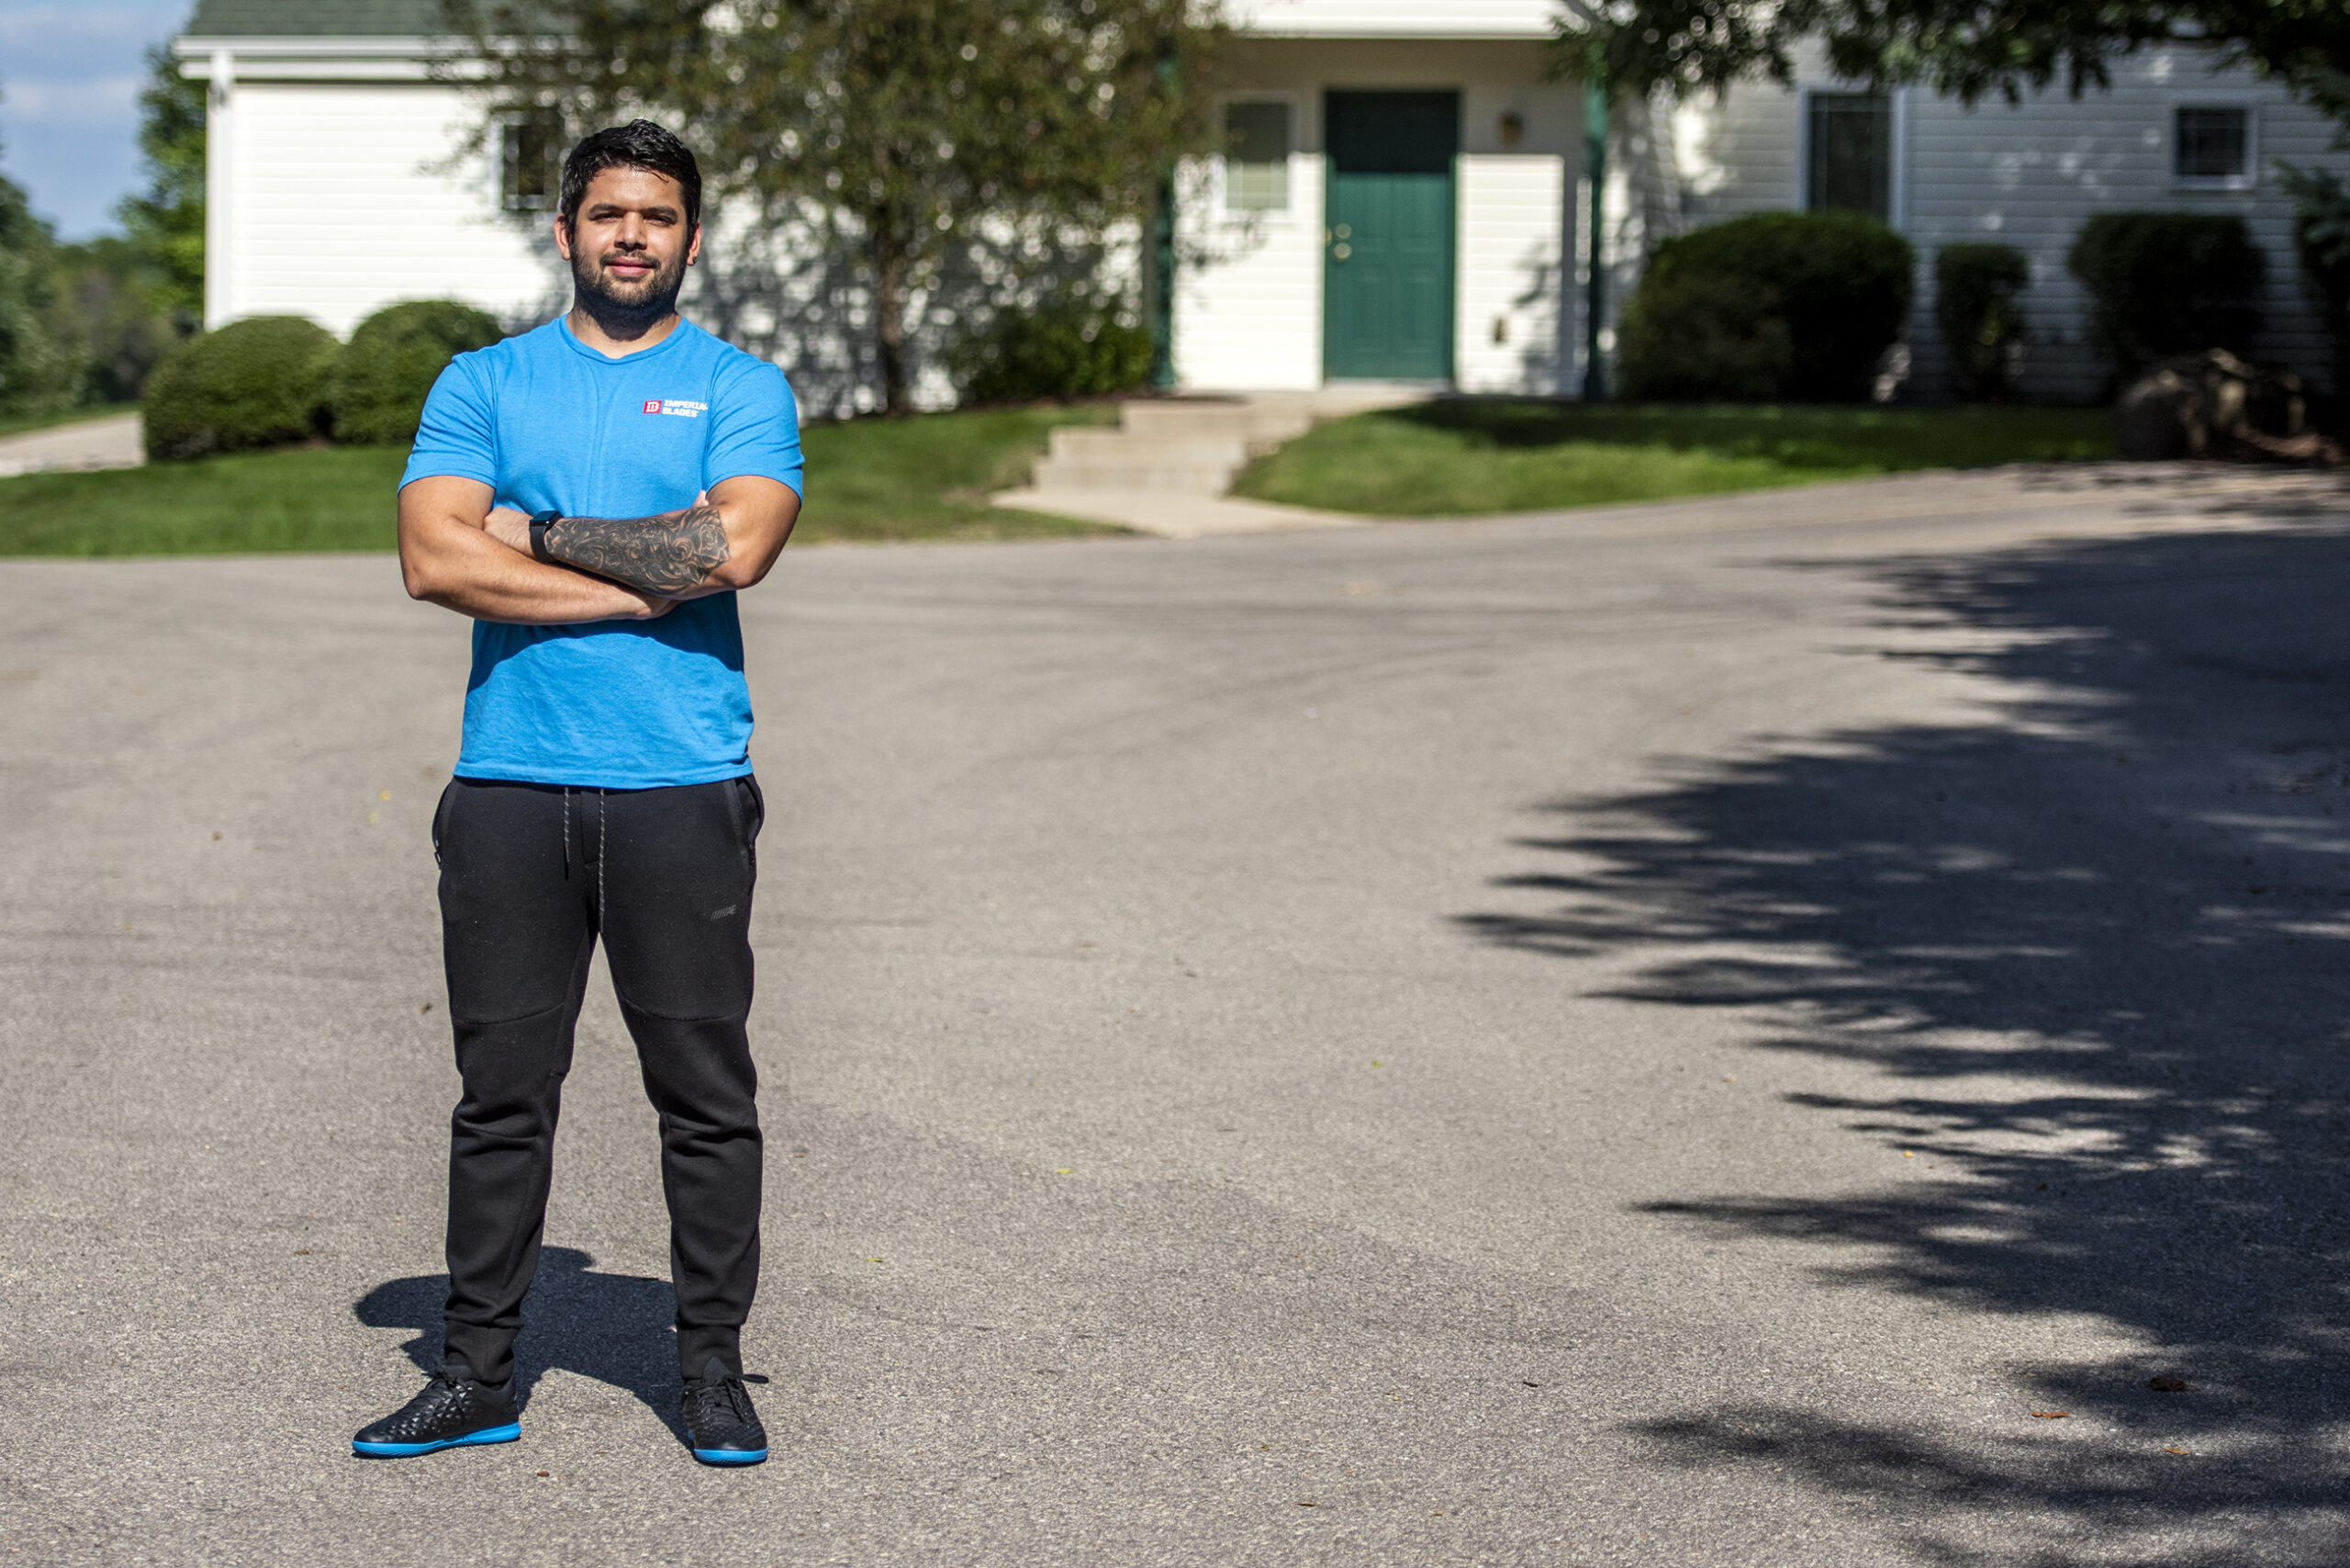 A man in a blue t-shirt stands outside in a neighborhood.